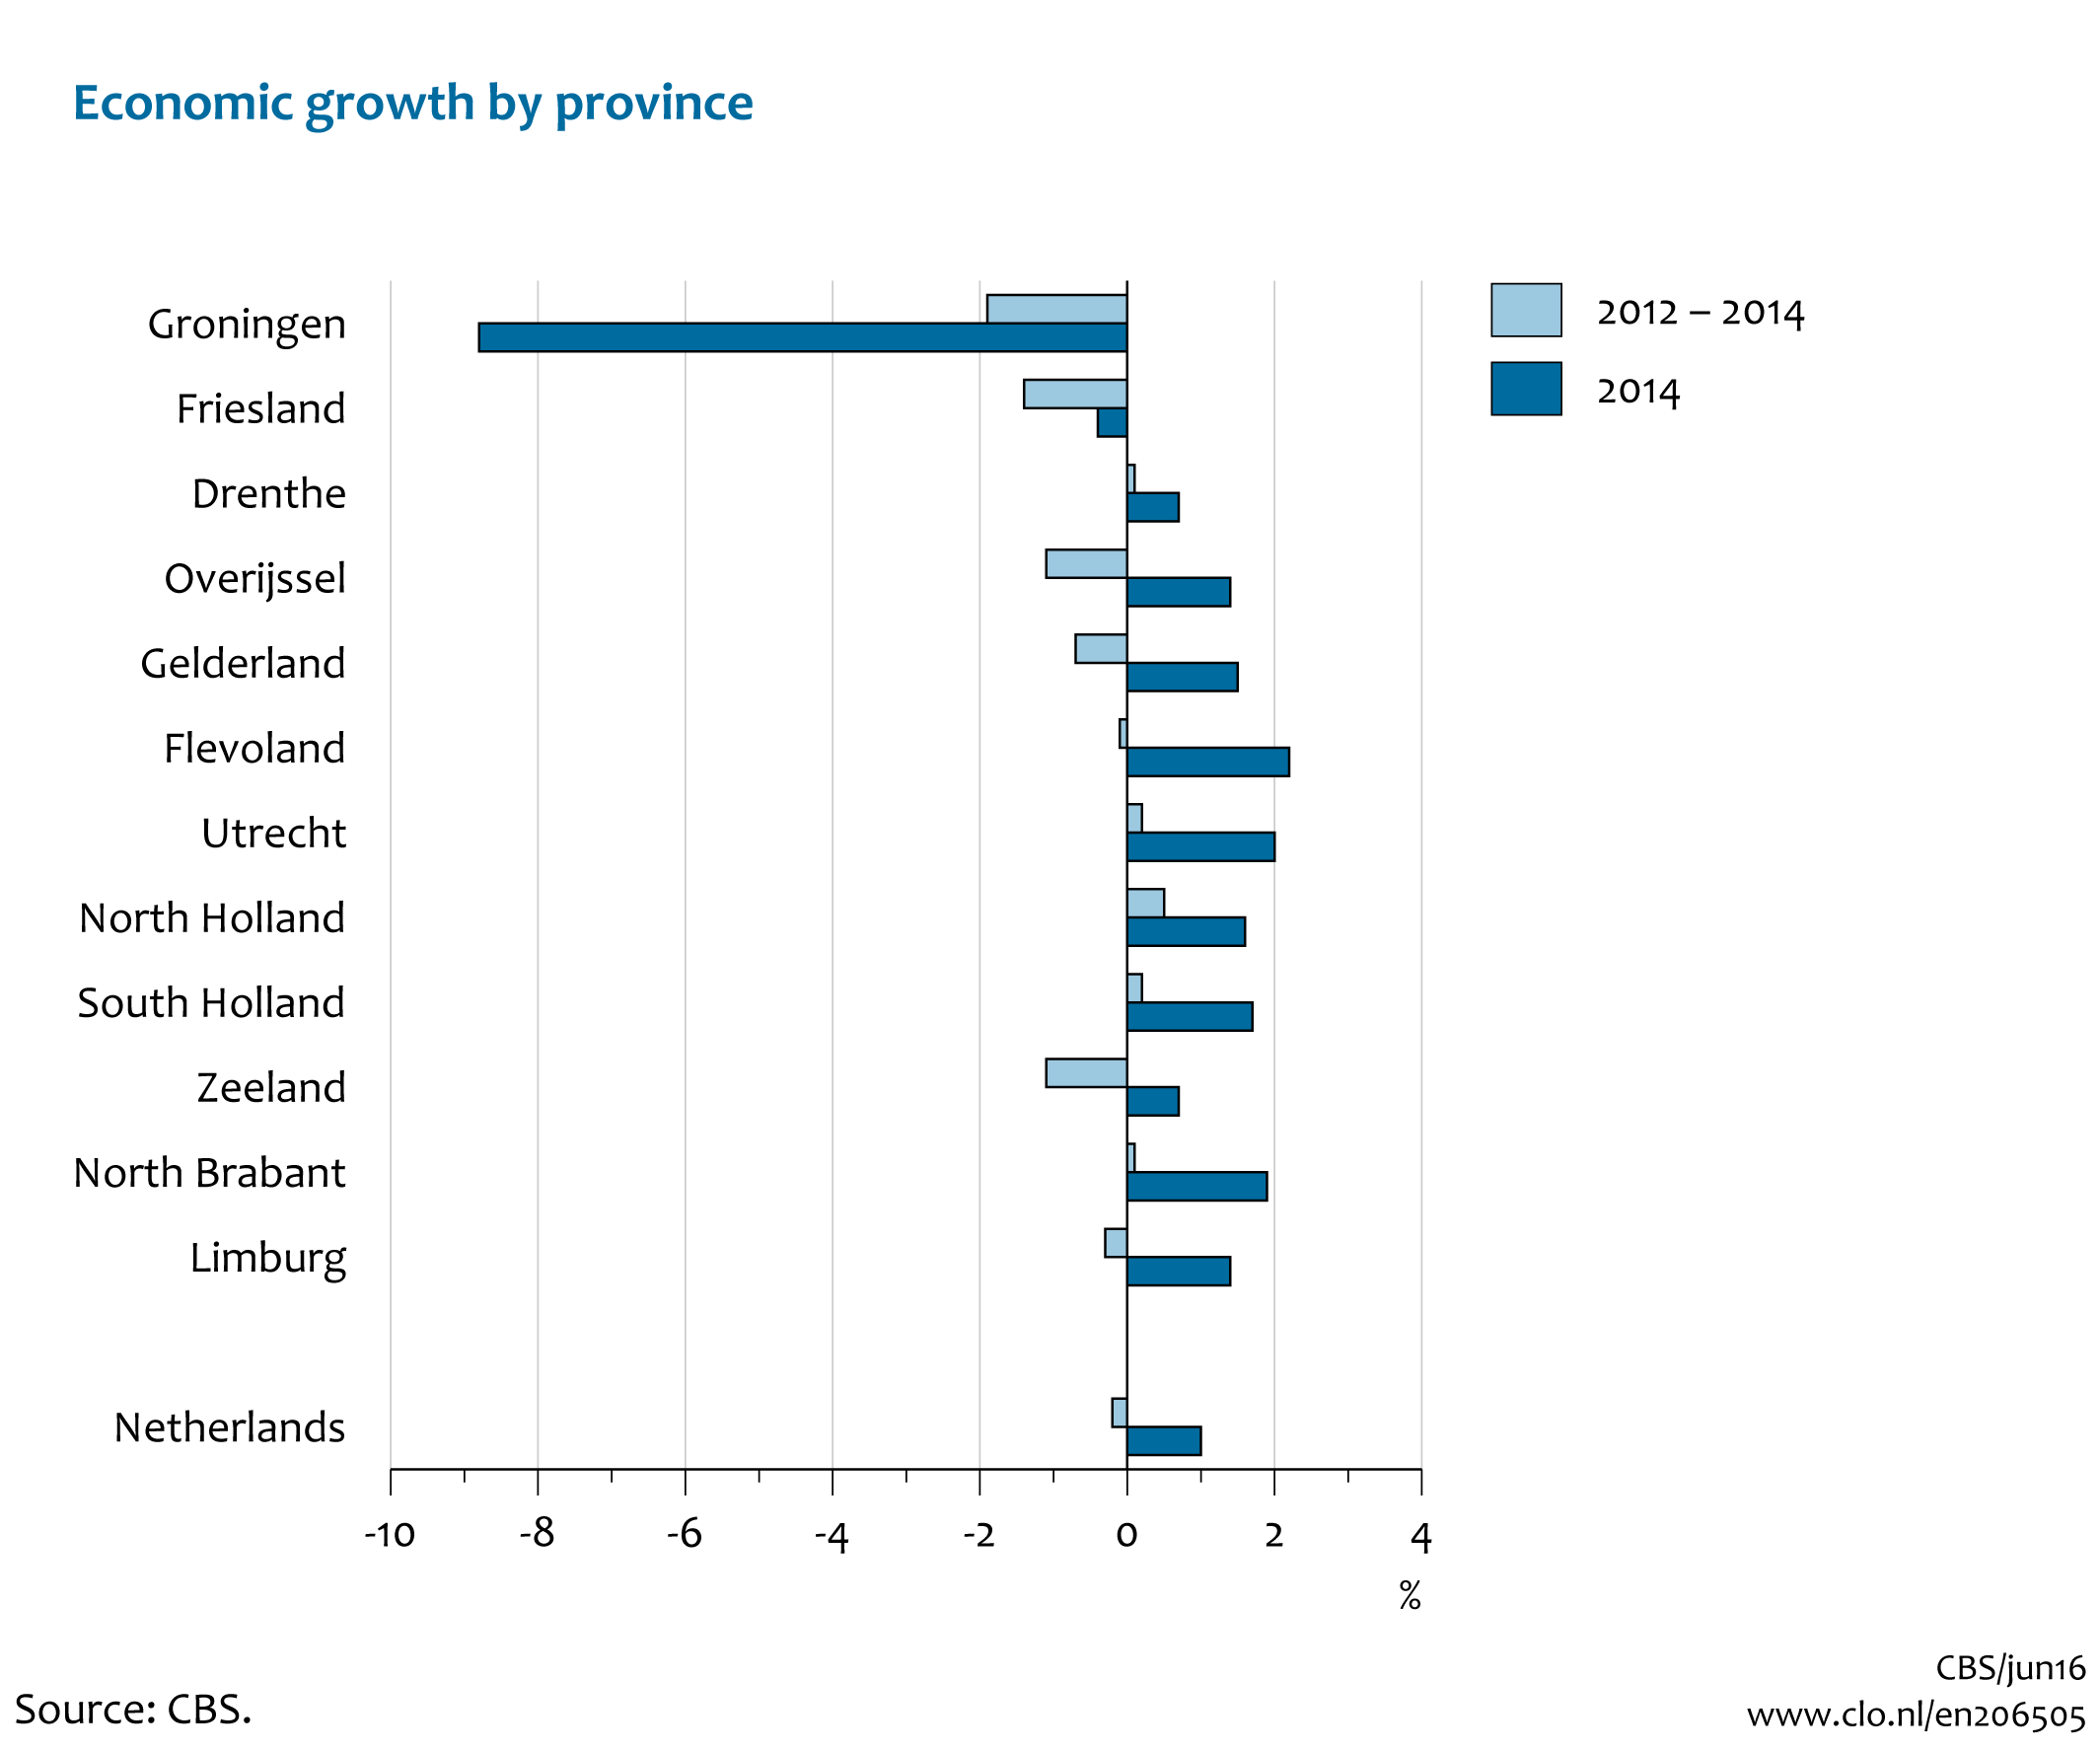 Image  Economic growth by province, 2012-2014. The image is further explained in the text.